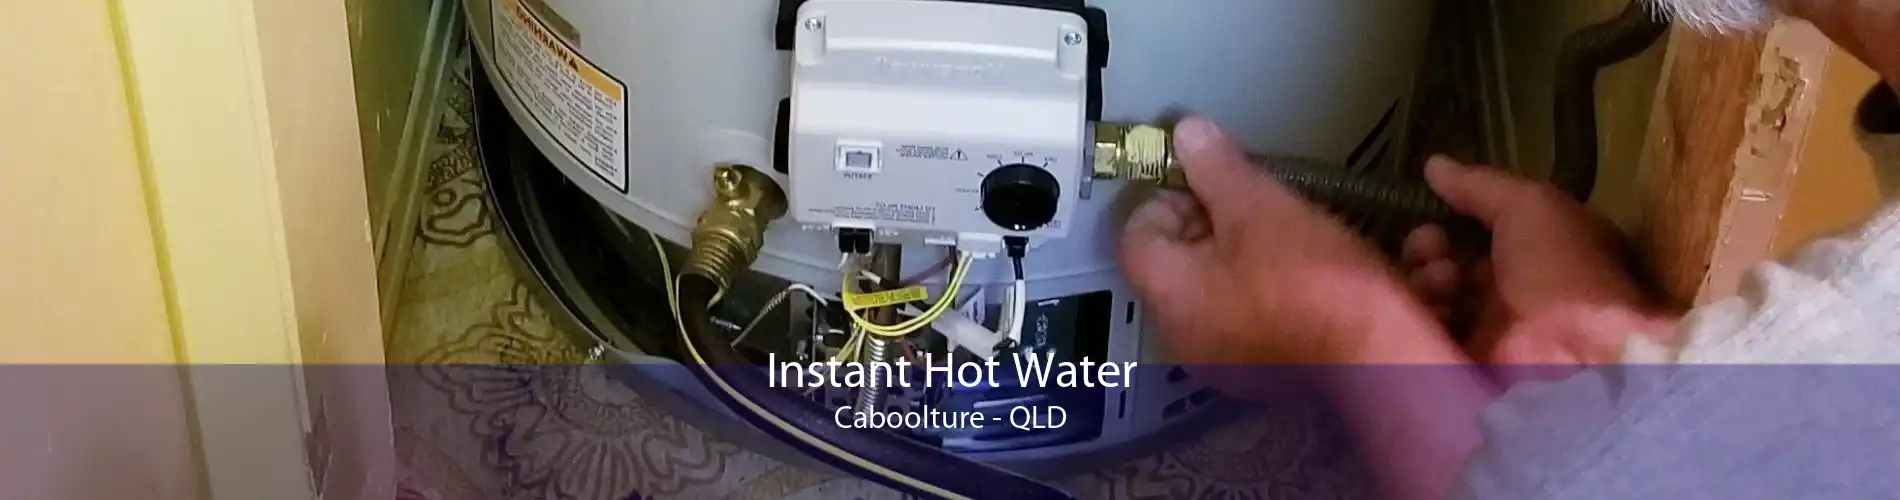 Instant Hot Water Caboolture - QLD